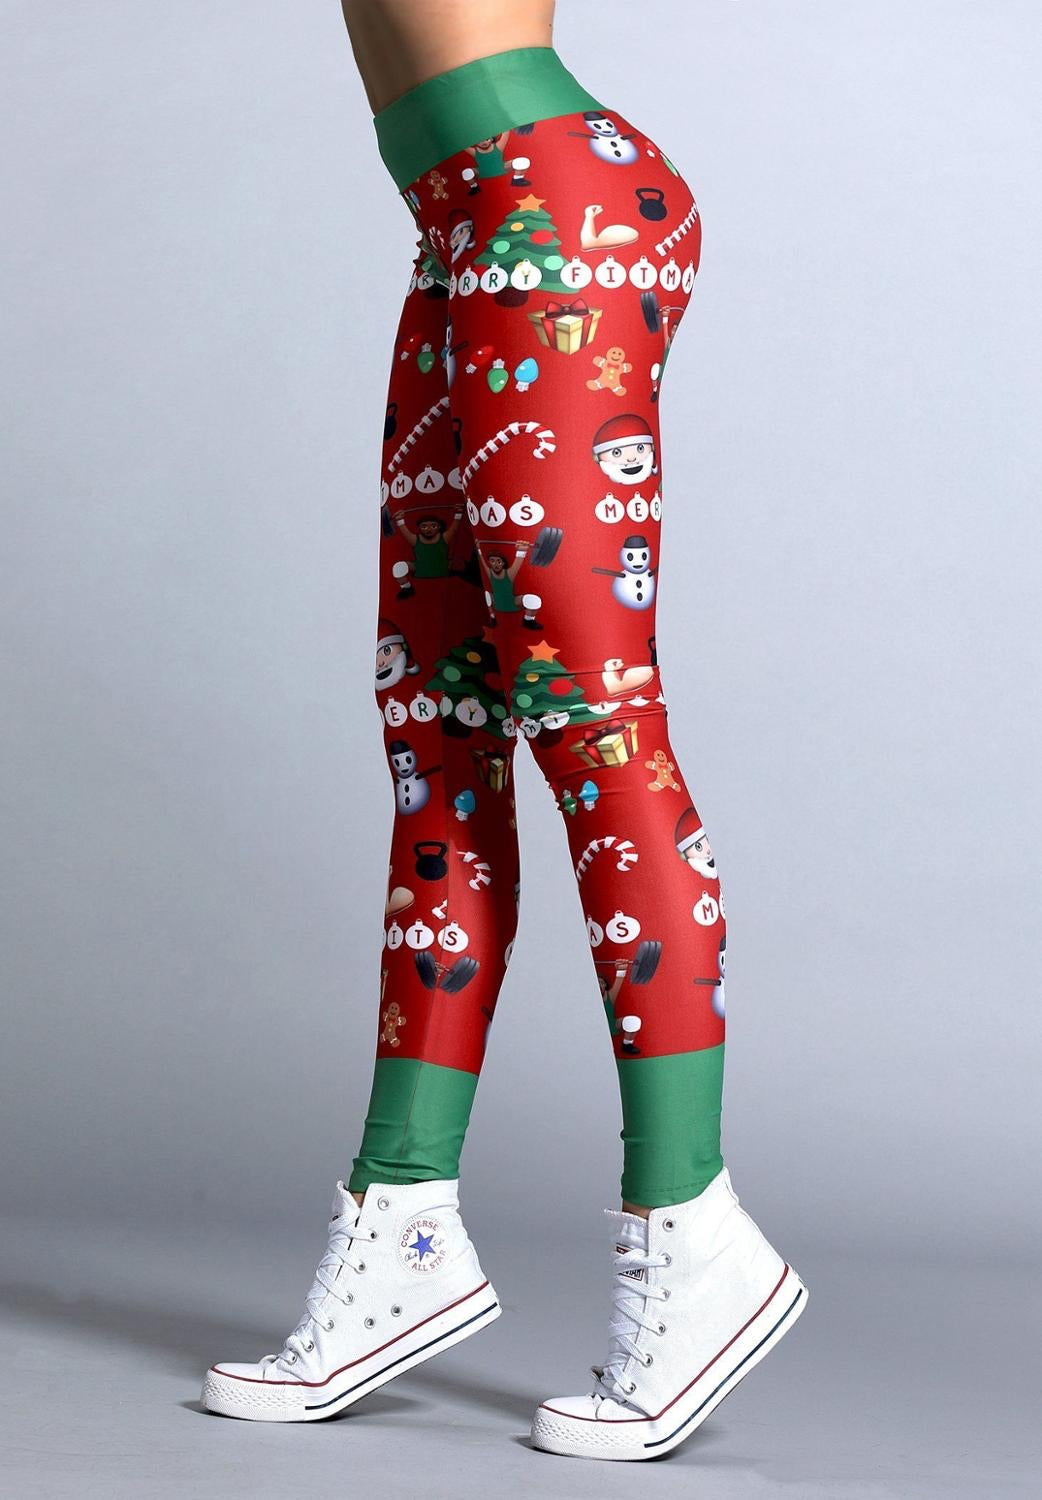 Funny Dinosaur Christmas Leggings & Tights - You Look Ugly Today